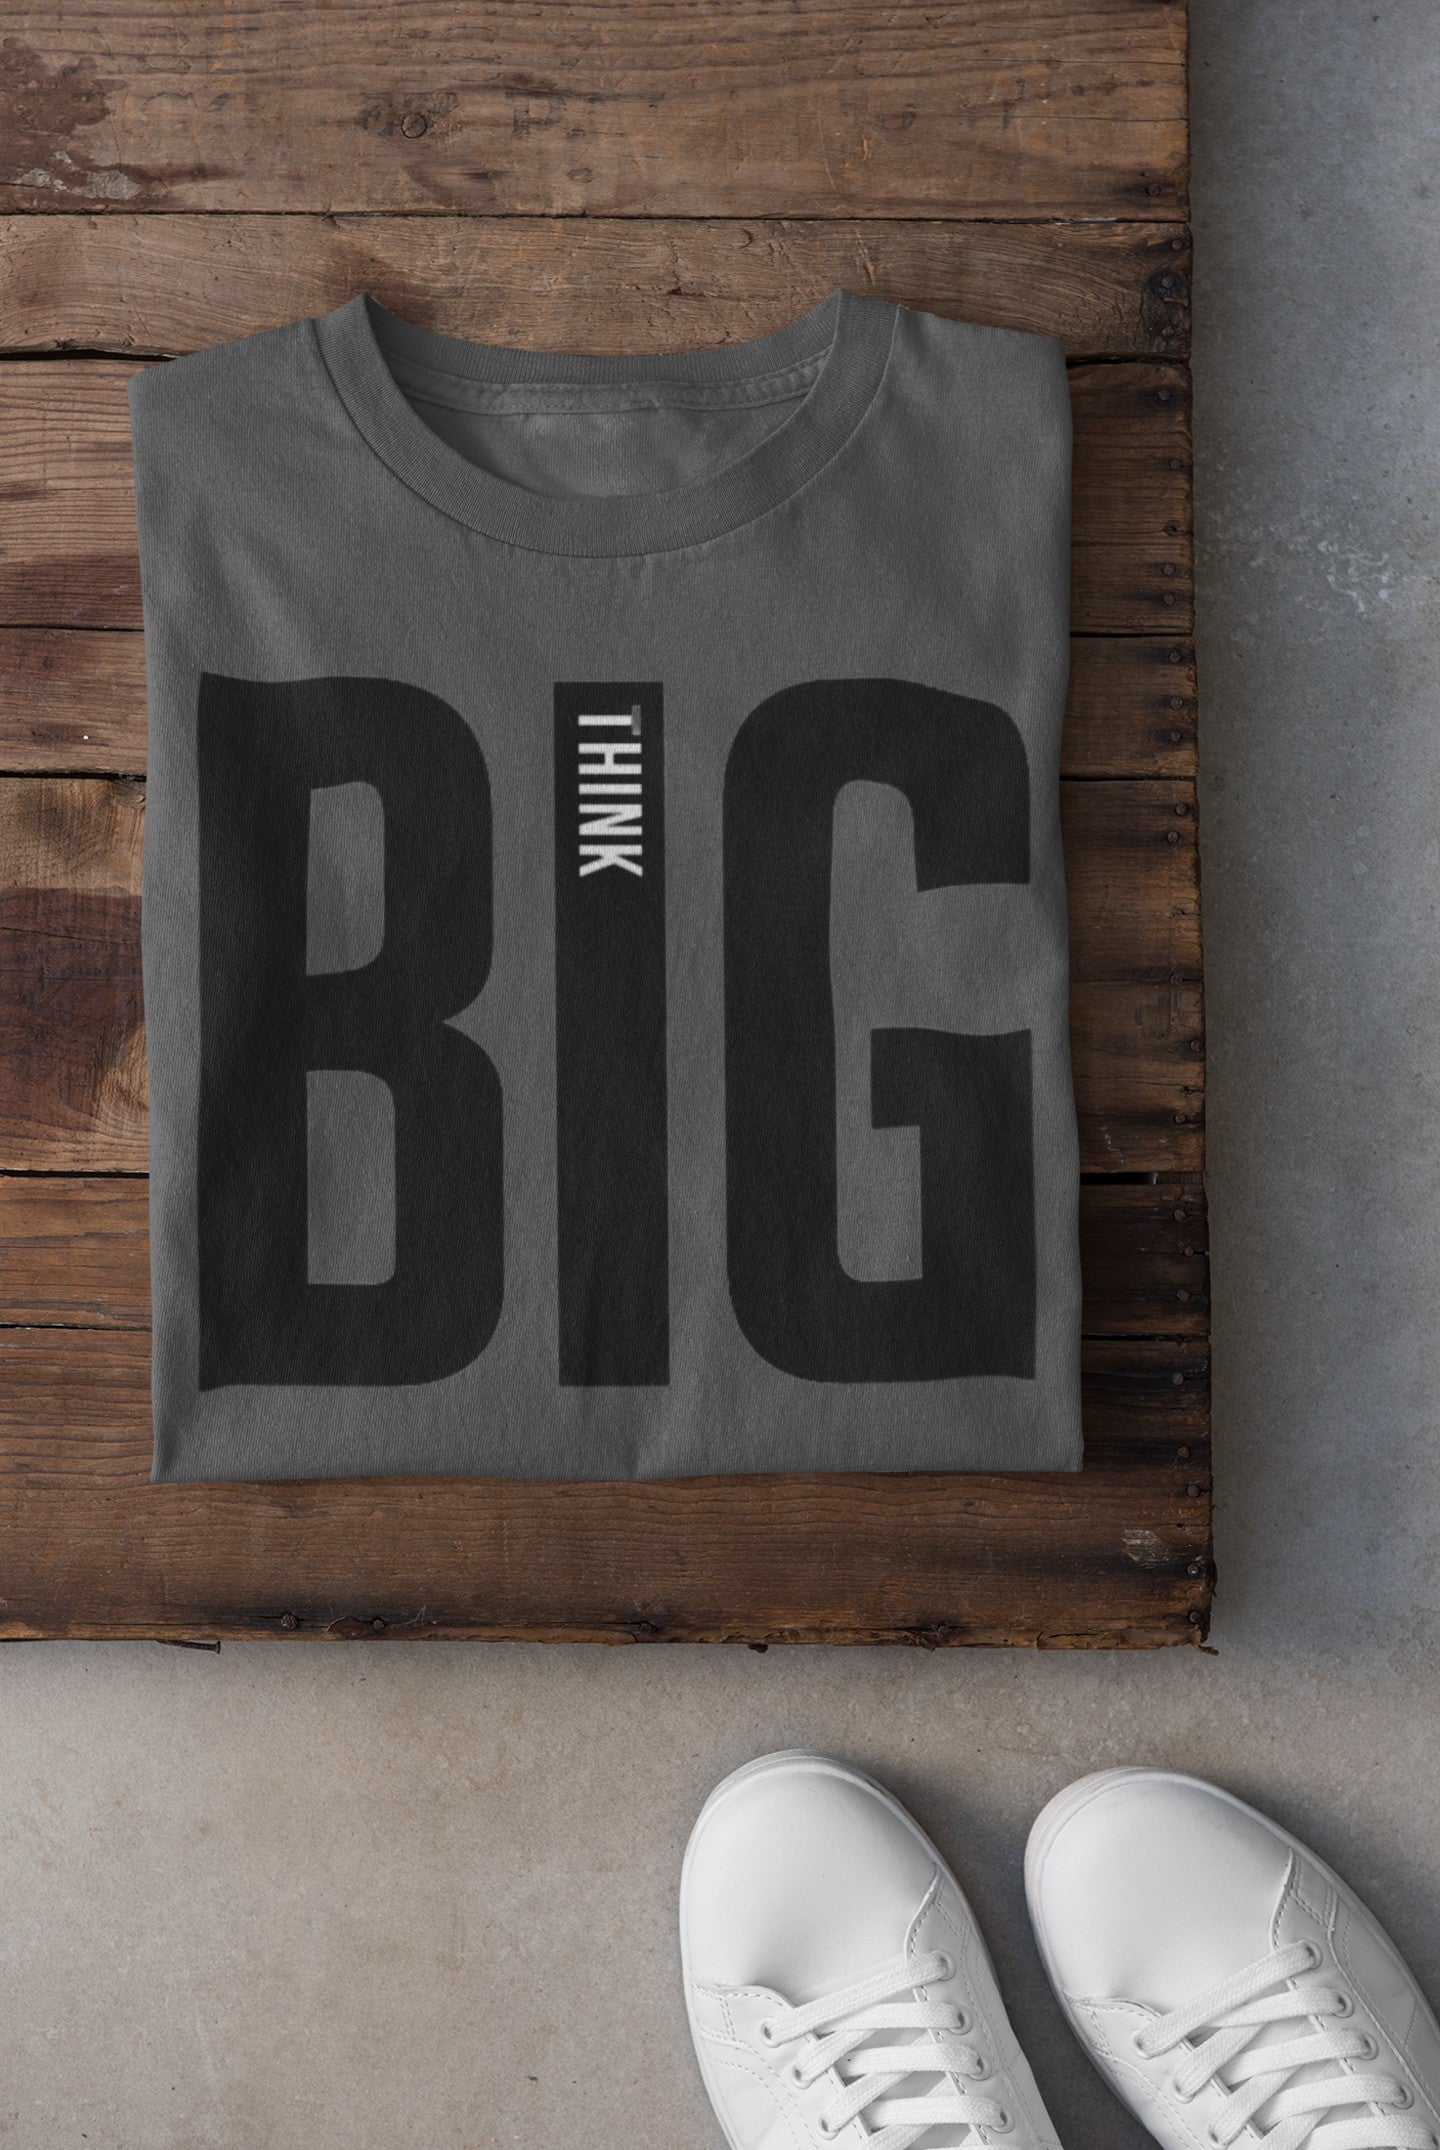 Gym T Shirt - Think Big with premium cotton Lycra. The Sports T Shirt by Strong Soul